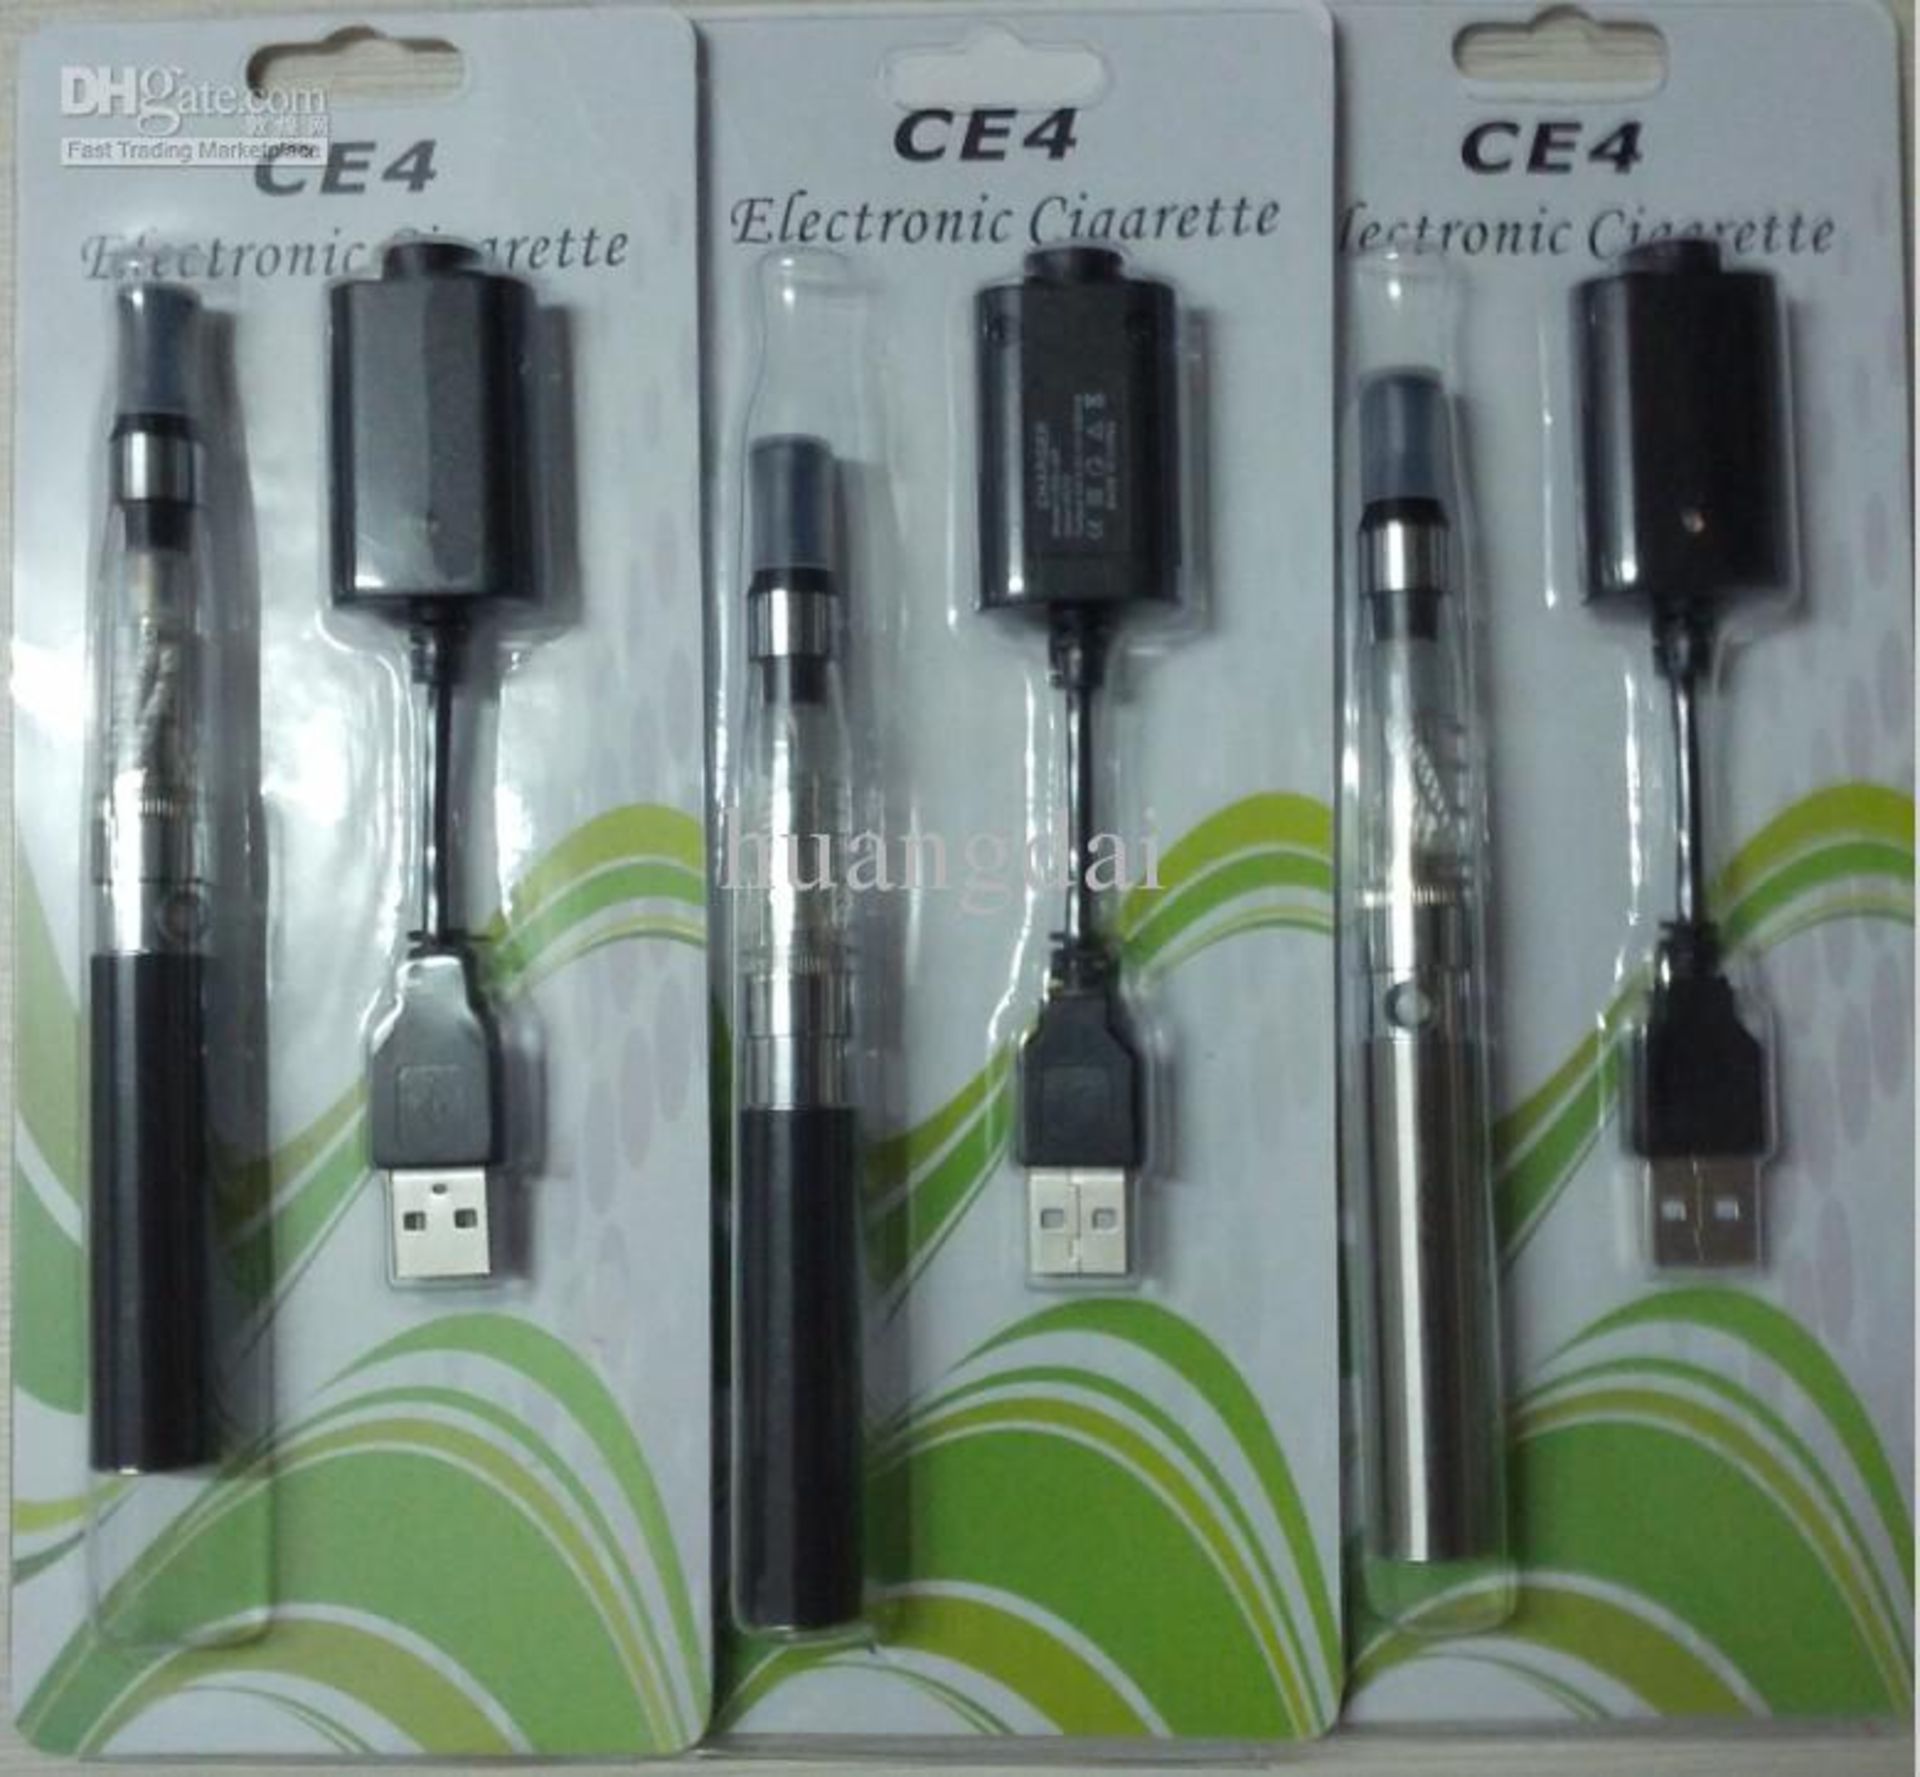 10 BRAND NEW BOXED CE4 ELECTRONIC CIGARETTES